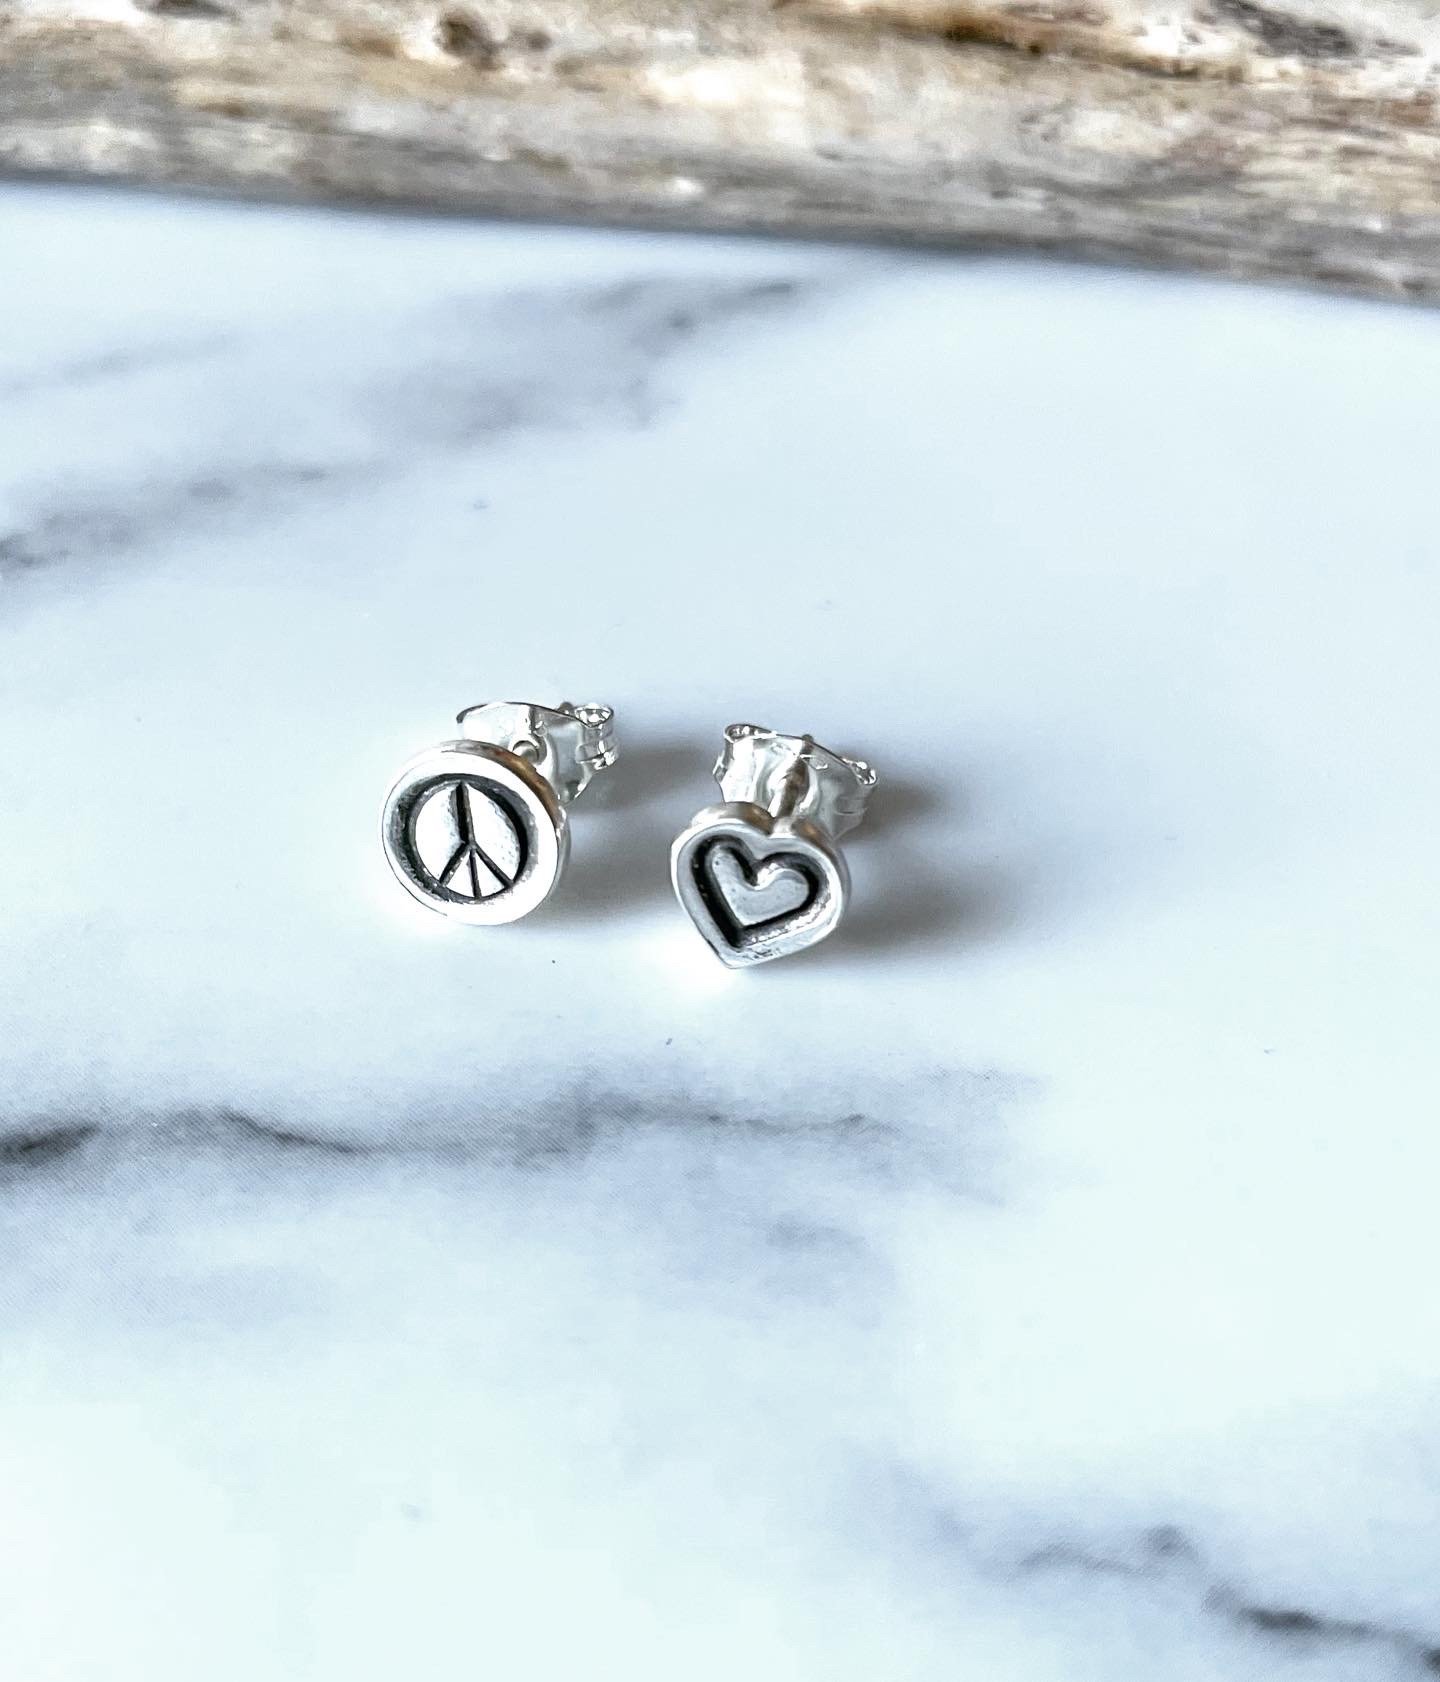 Image of Handmade Mismatched Peace And Love Heart Sterling Silver Stud Earrings 925